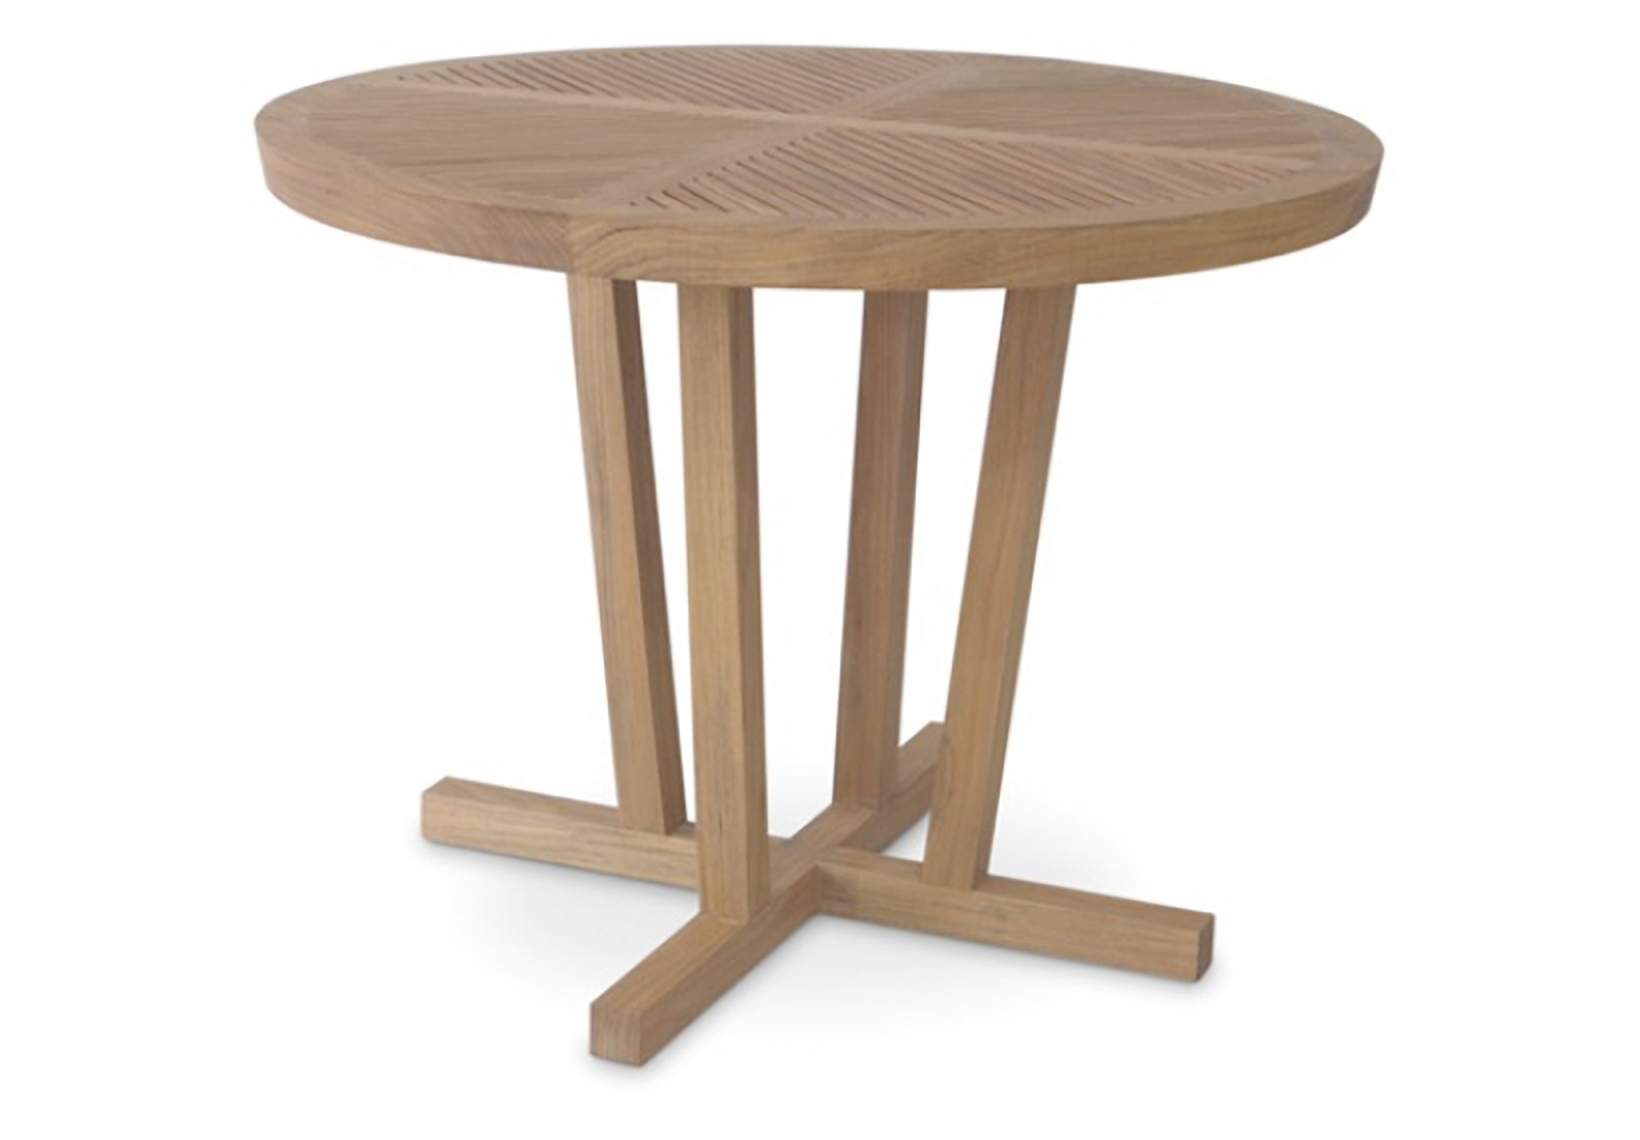 Spavision | Korogated Round Dining Table